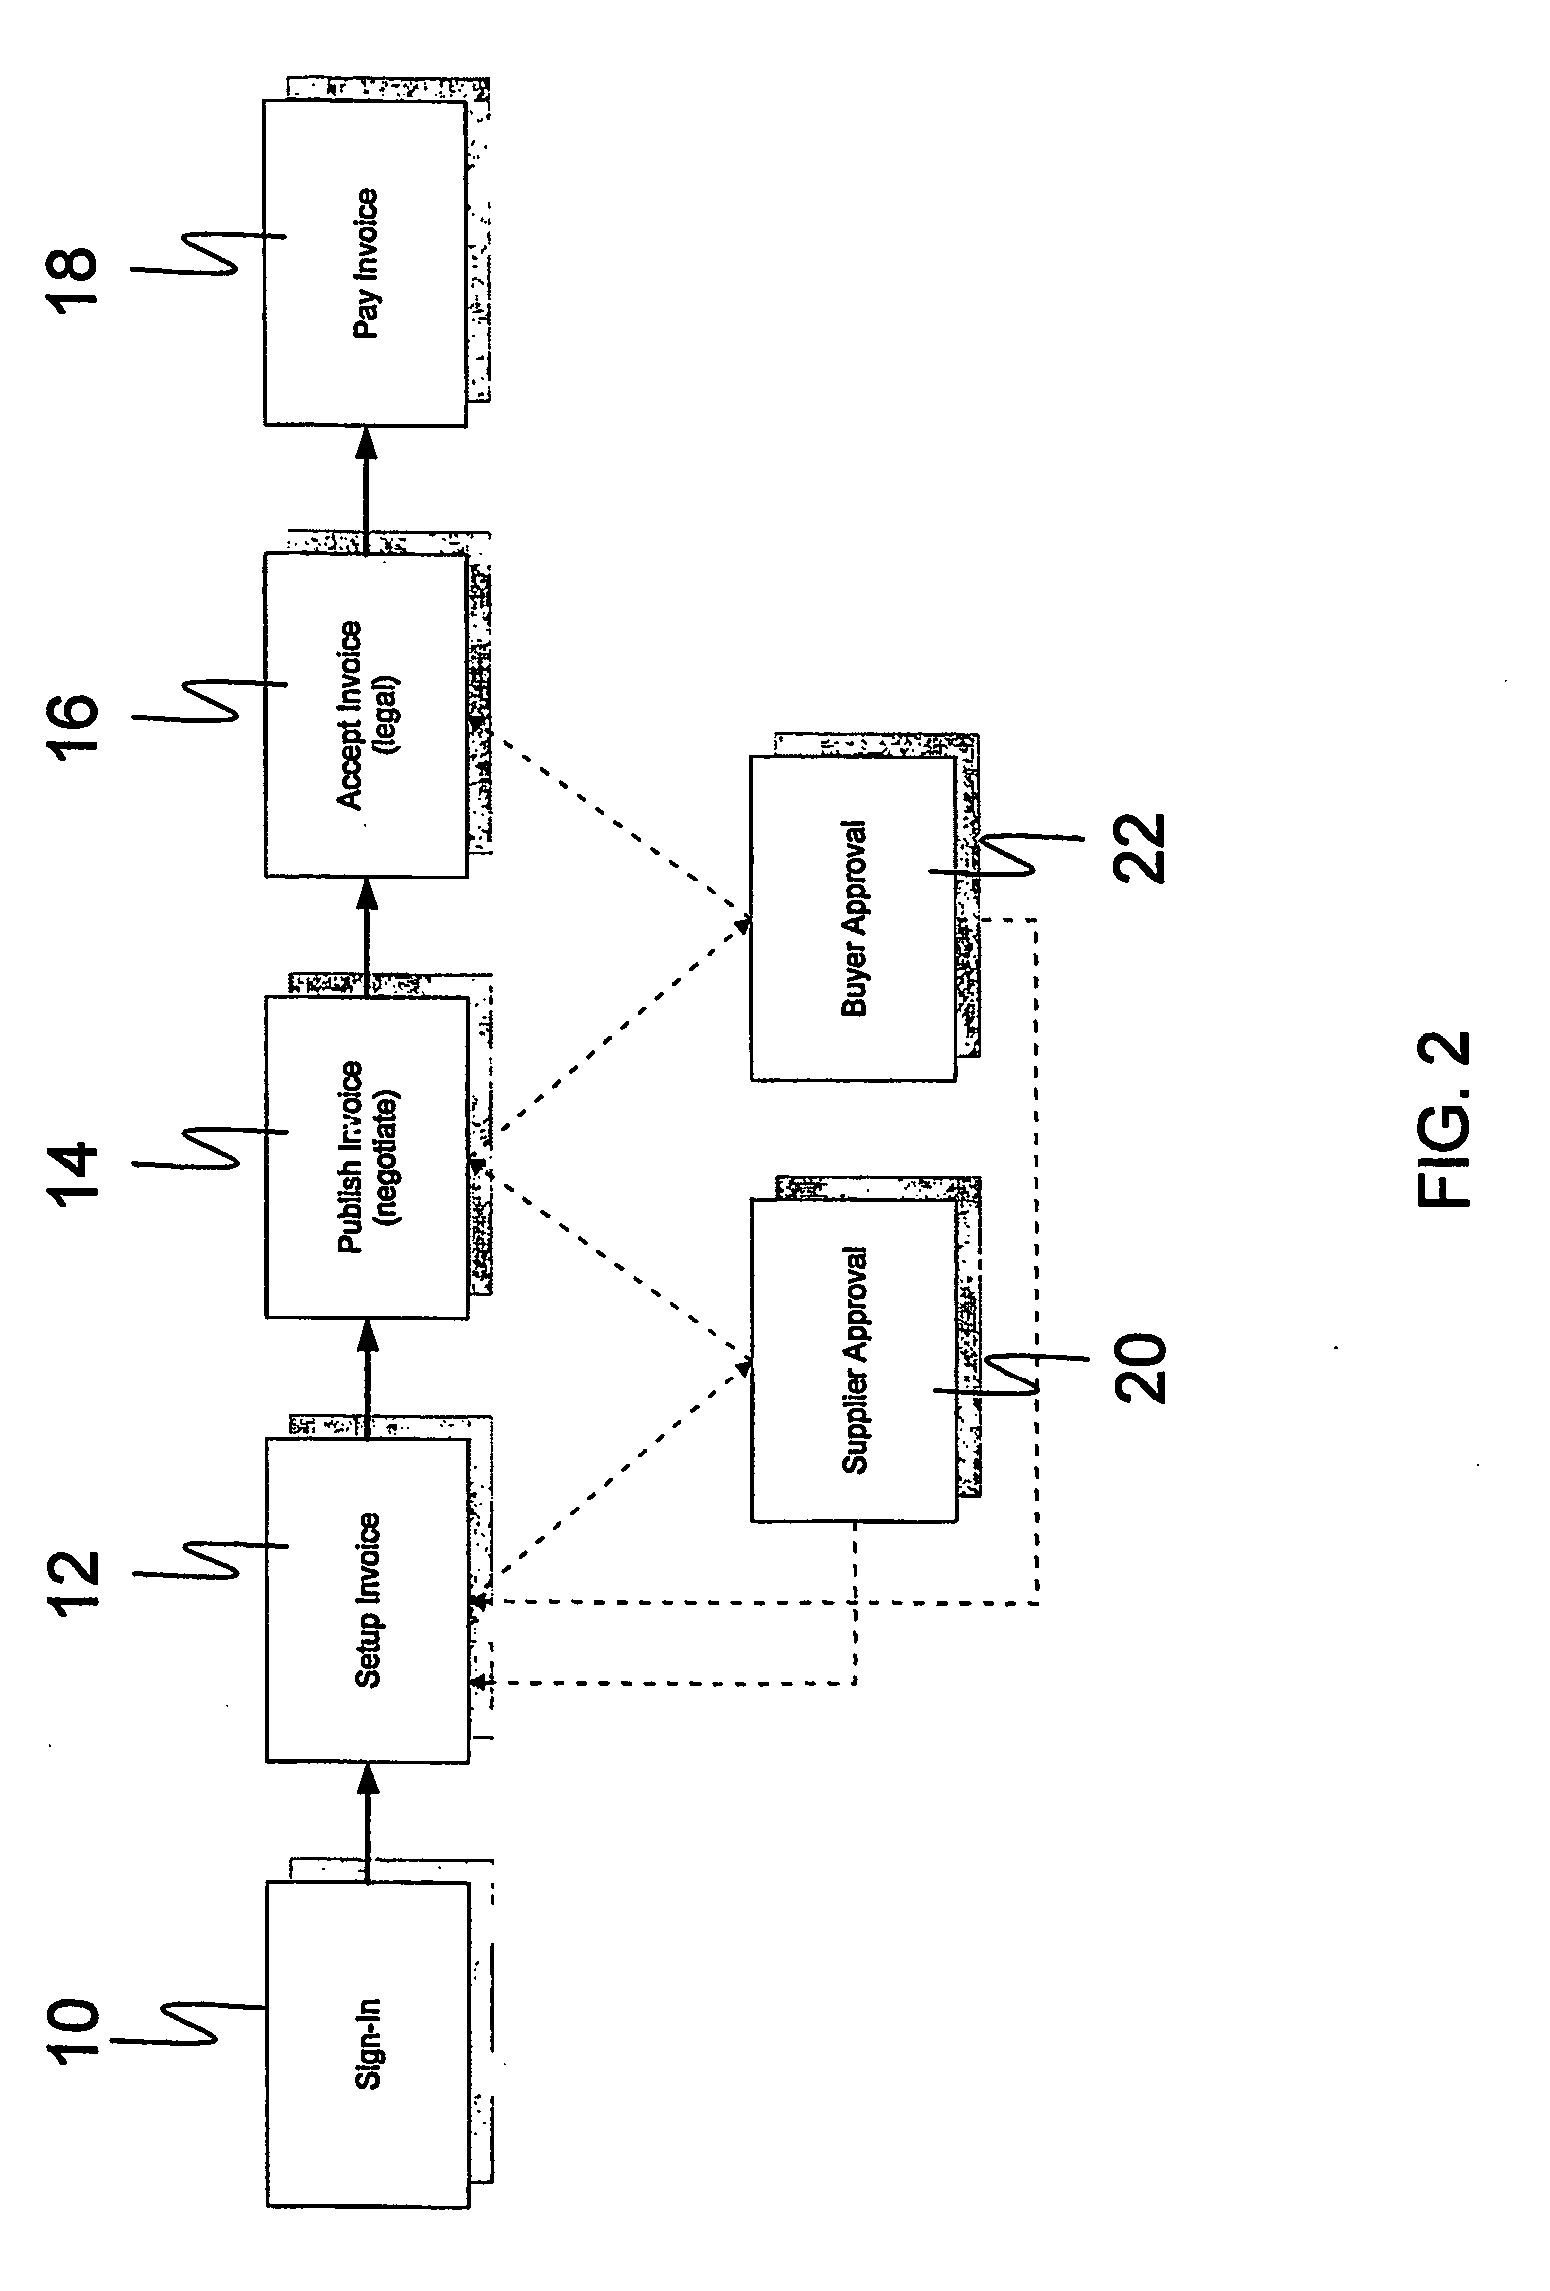 Performance monitoring system, method and apparatus